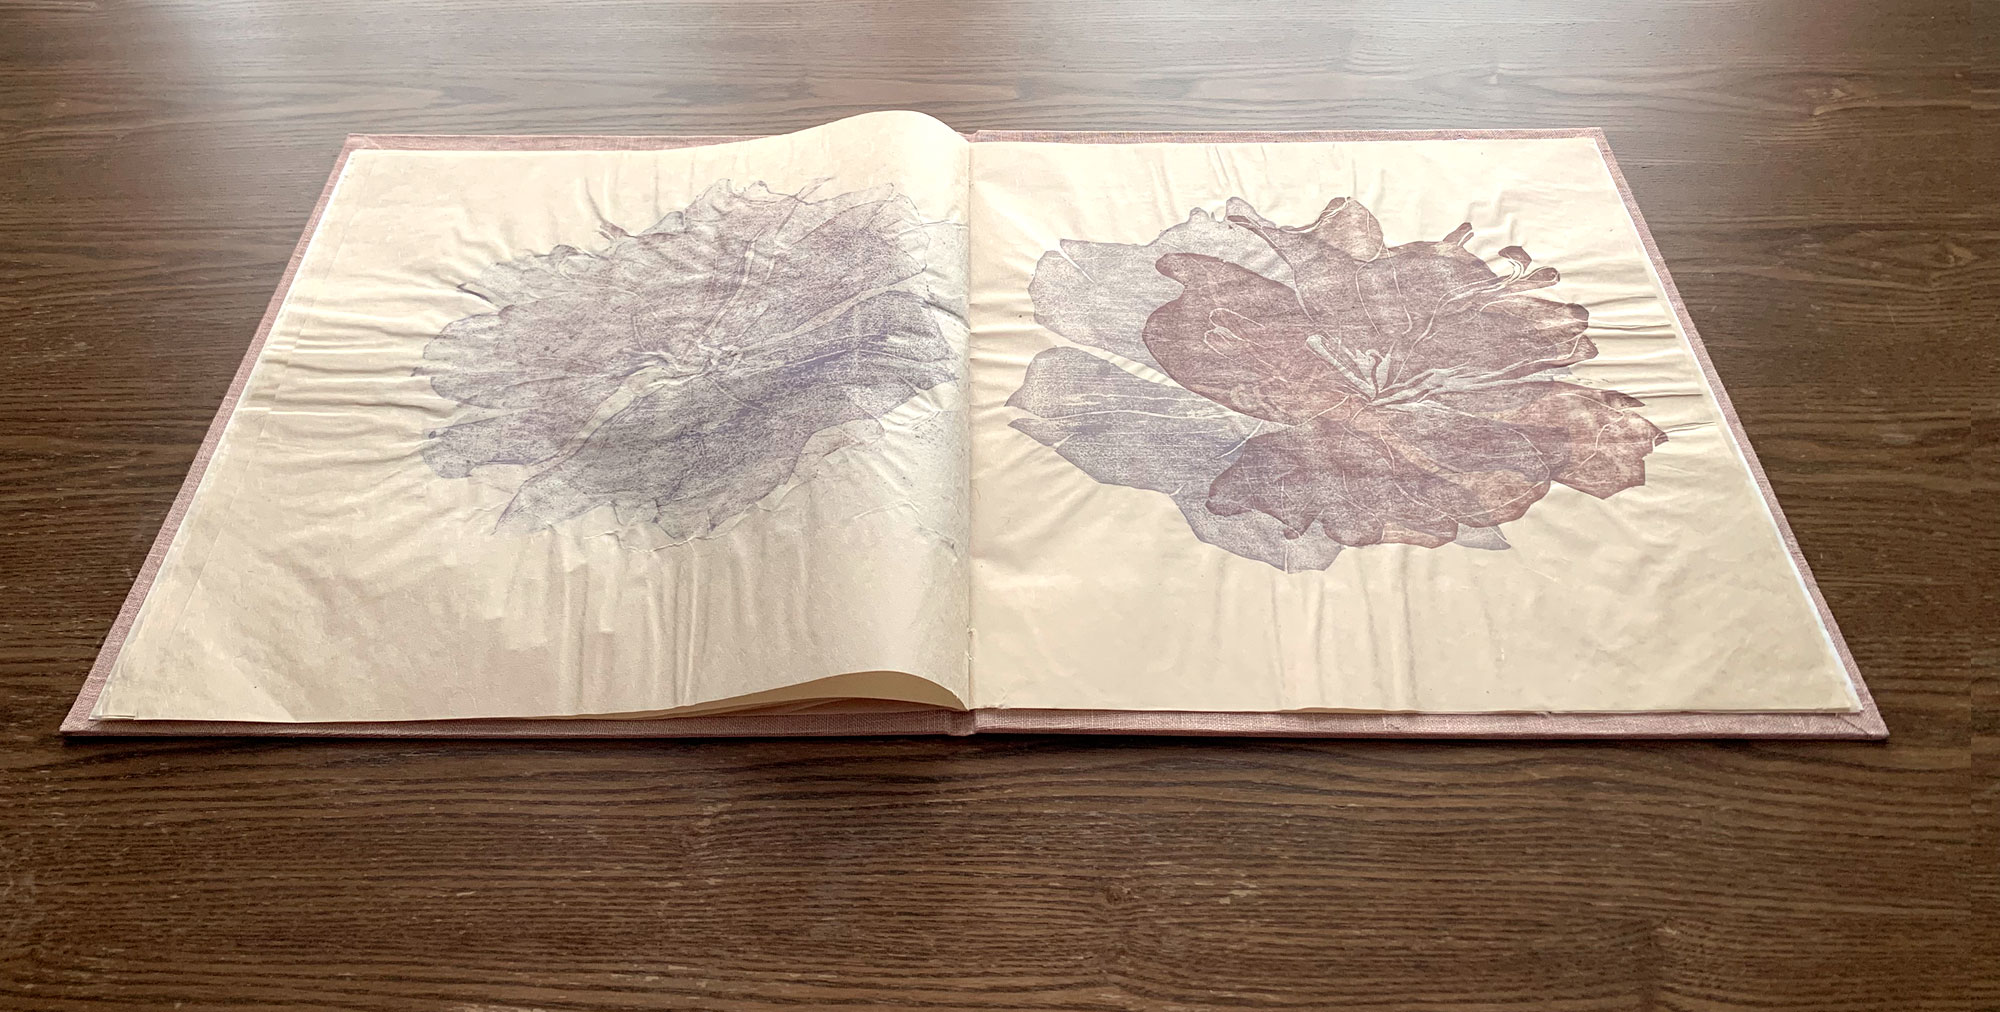 an open book showing cherry blossom woodblock prints, BIG cherry blossom artist’s book, 13 x 14 ½ inches, single section case binding structure, linen bookcloth on cover is dyed with avocado seeds, pages are woodblock printed with watercolors on natural Kitakata paper, July 2022